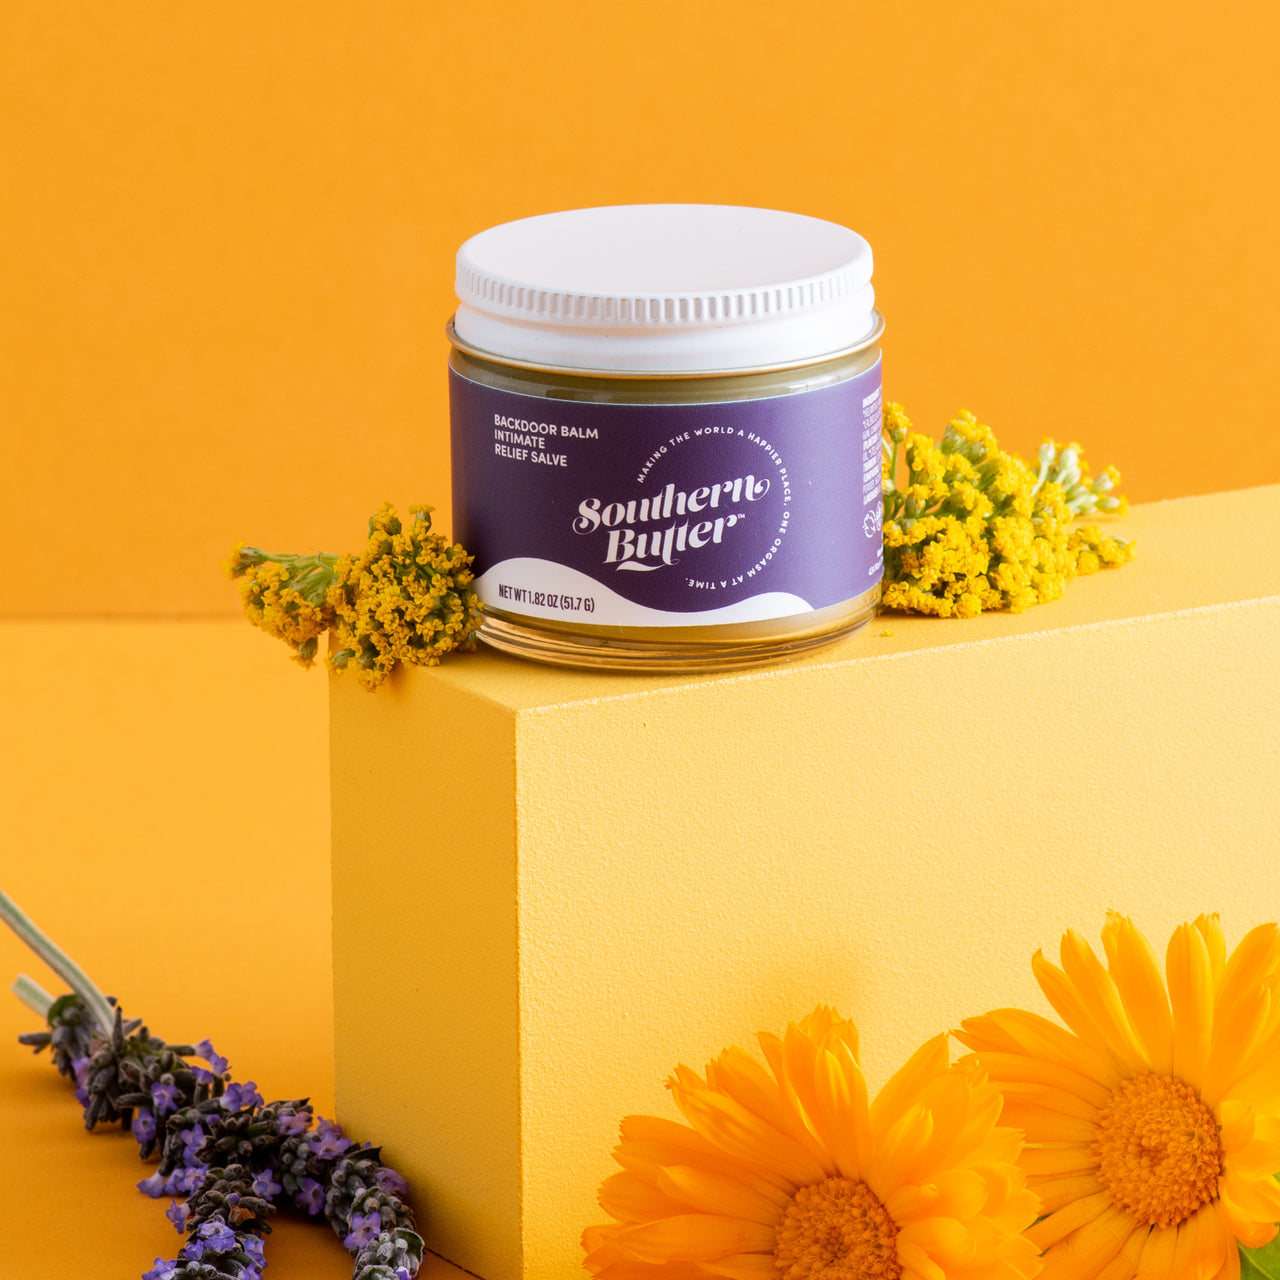 Backdoor Balm by Southern Butter